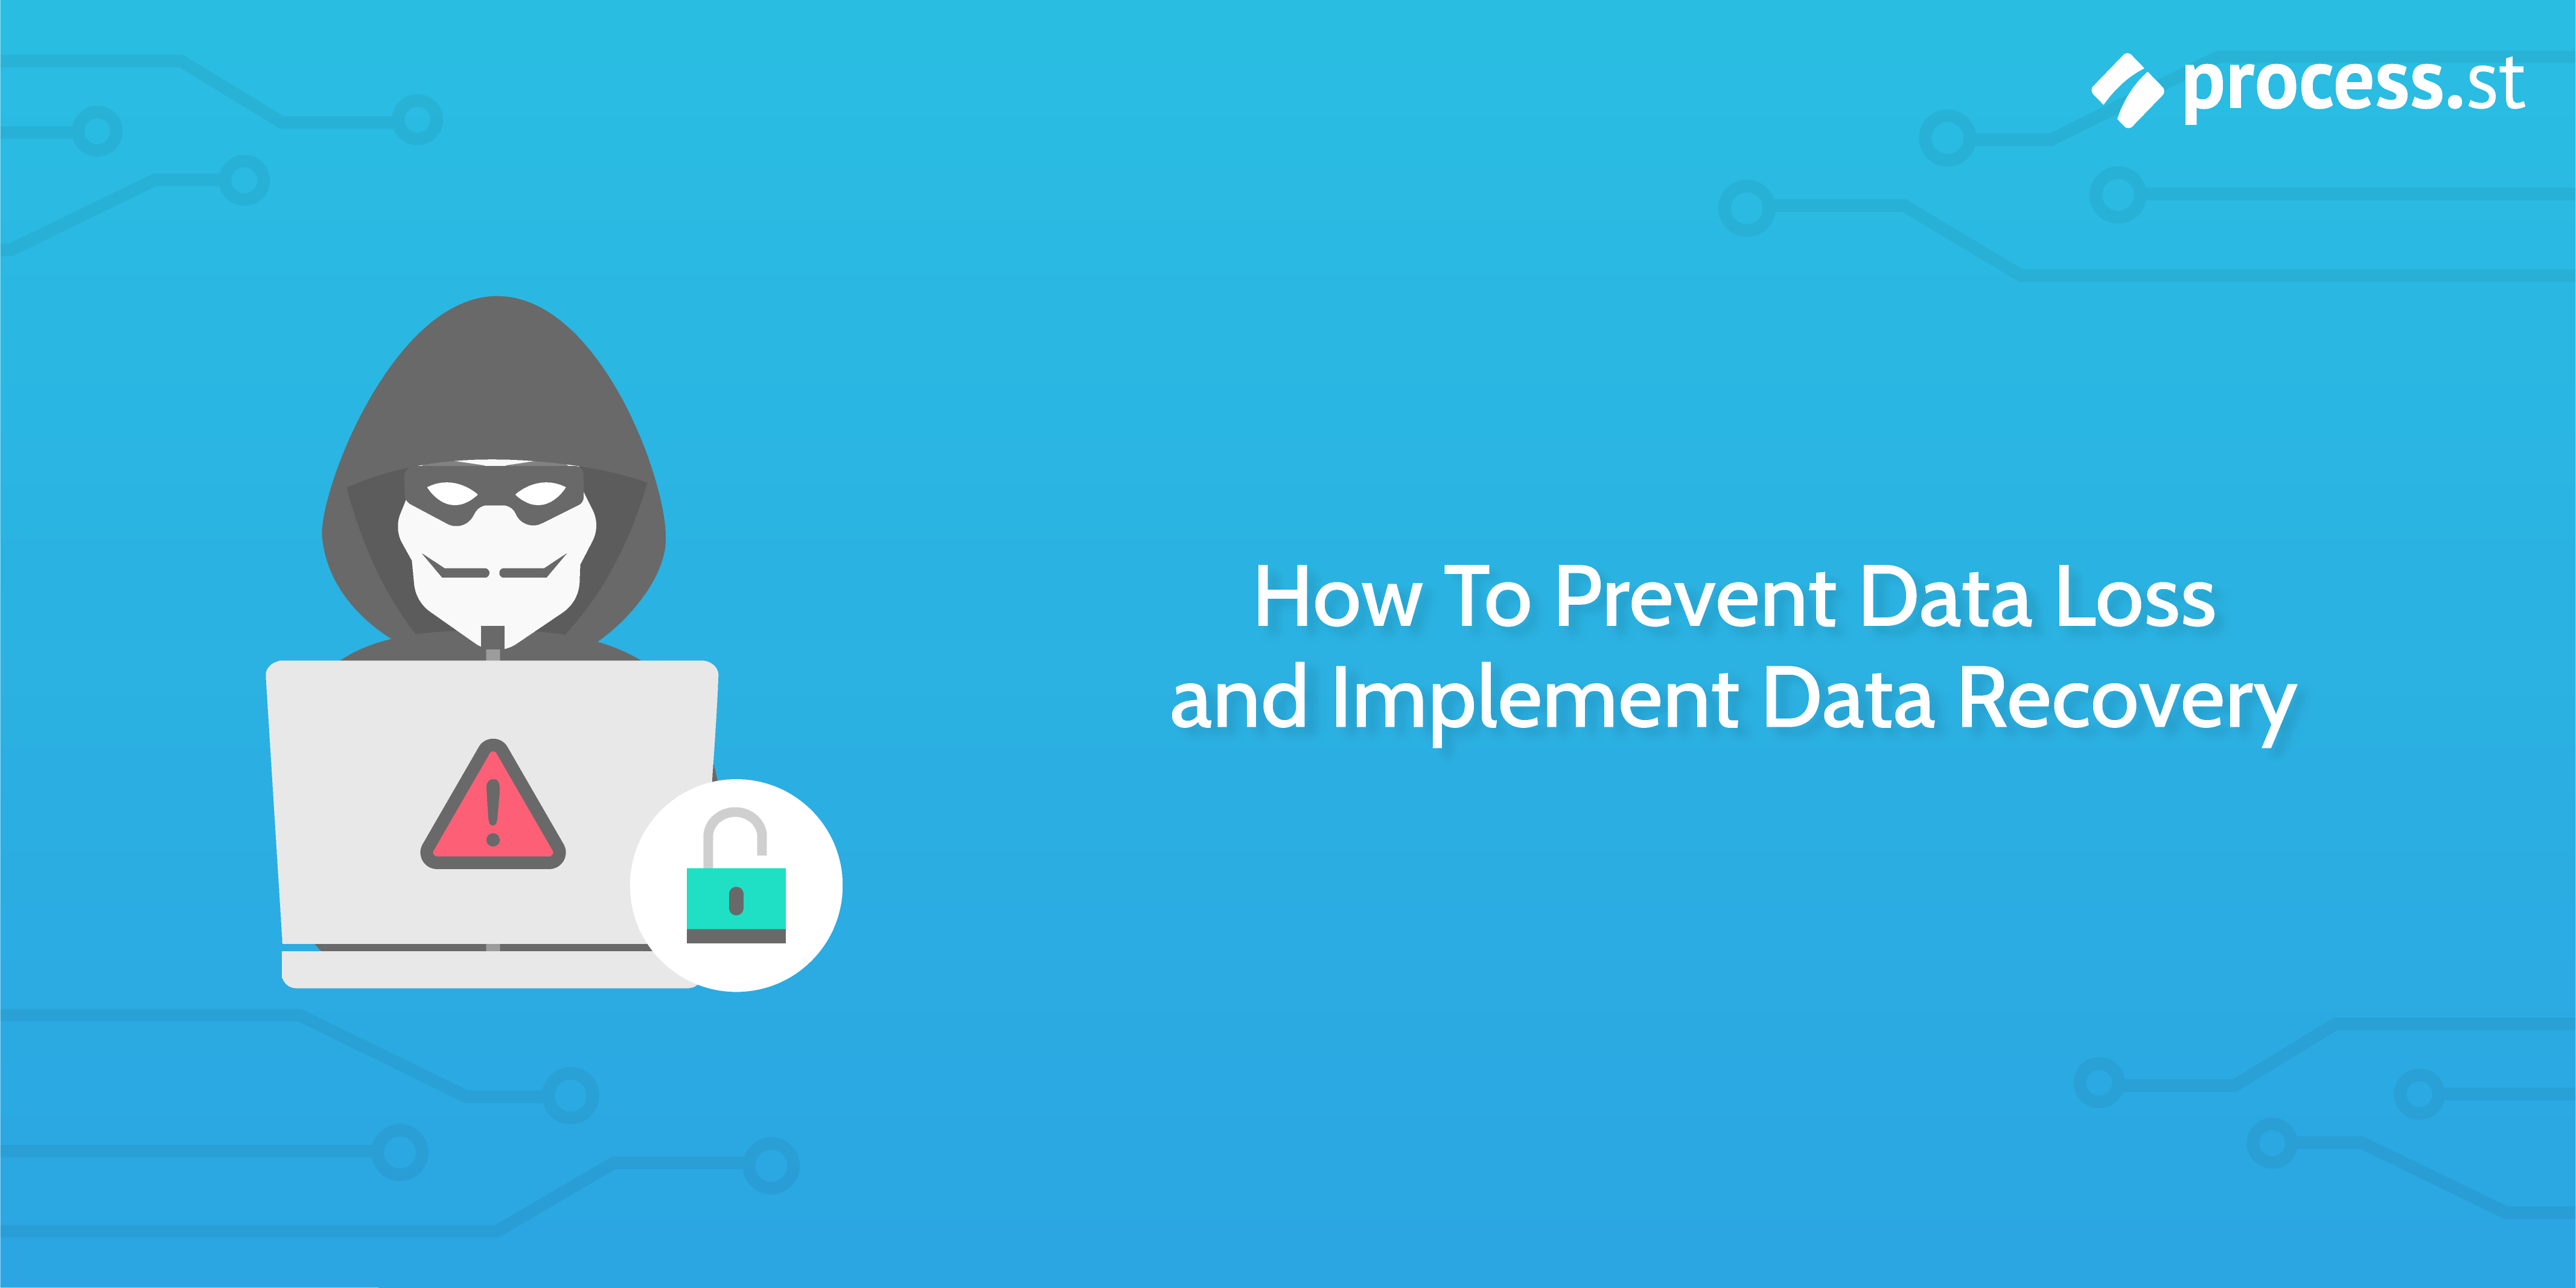 How To Prevent Data Loss And Implement Data Recovery